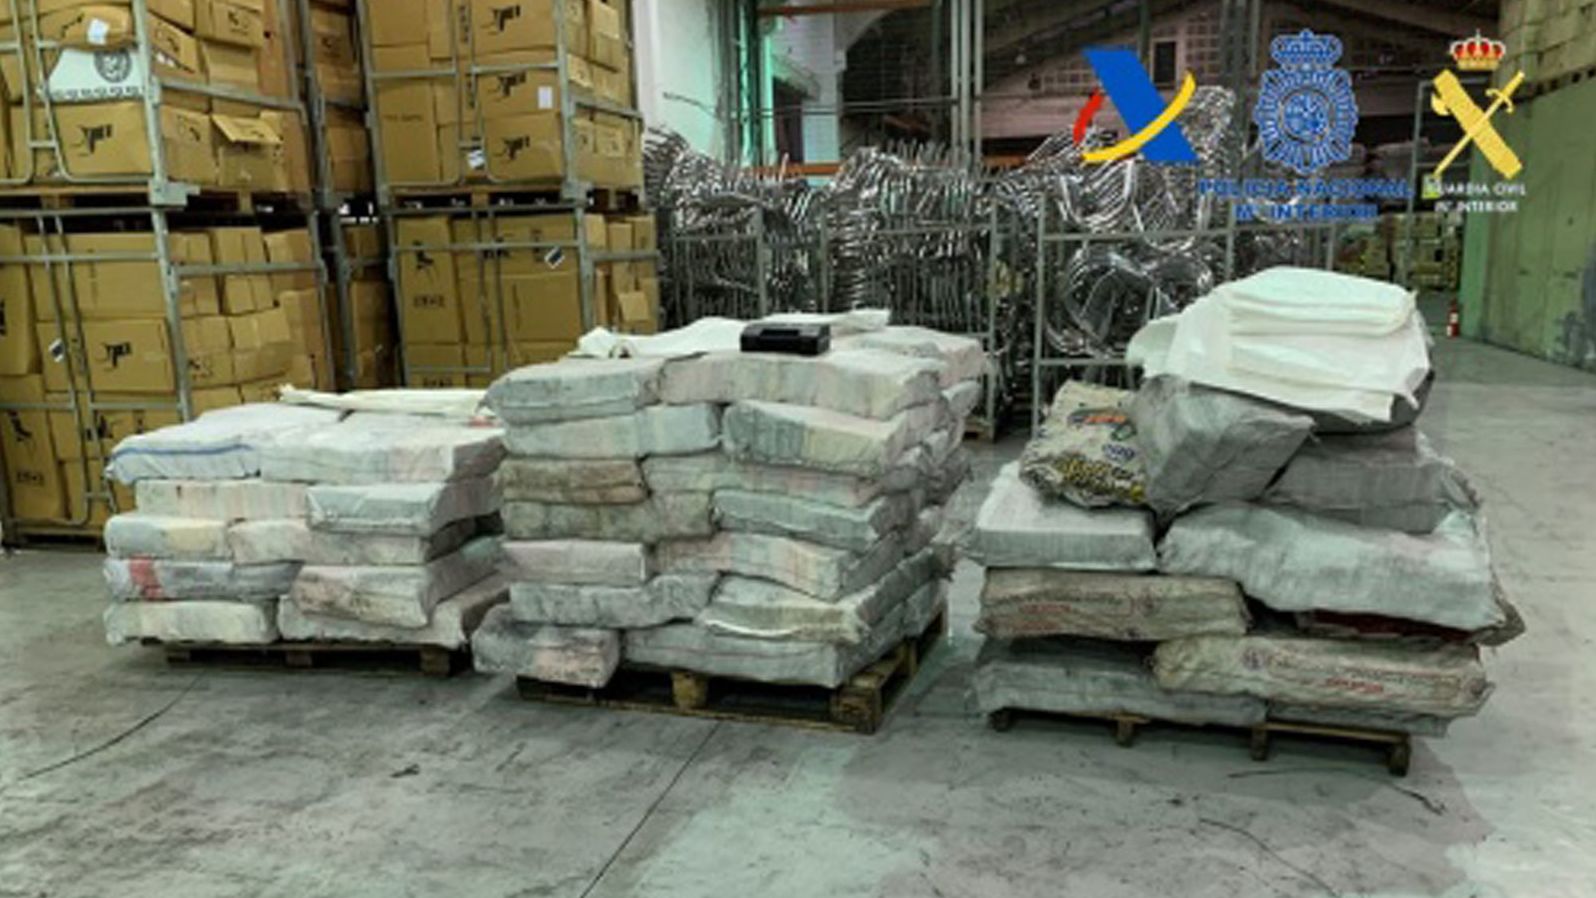 A total of 2,065 kilograms (4,553 pounds) of cocaine was seized at the port of Algeciras, southern Spain.